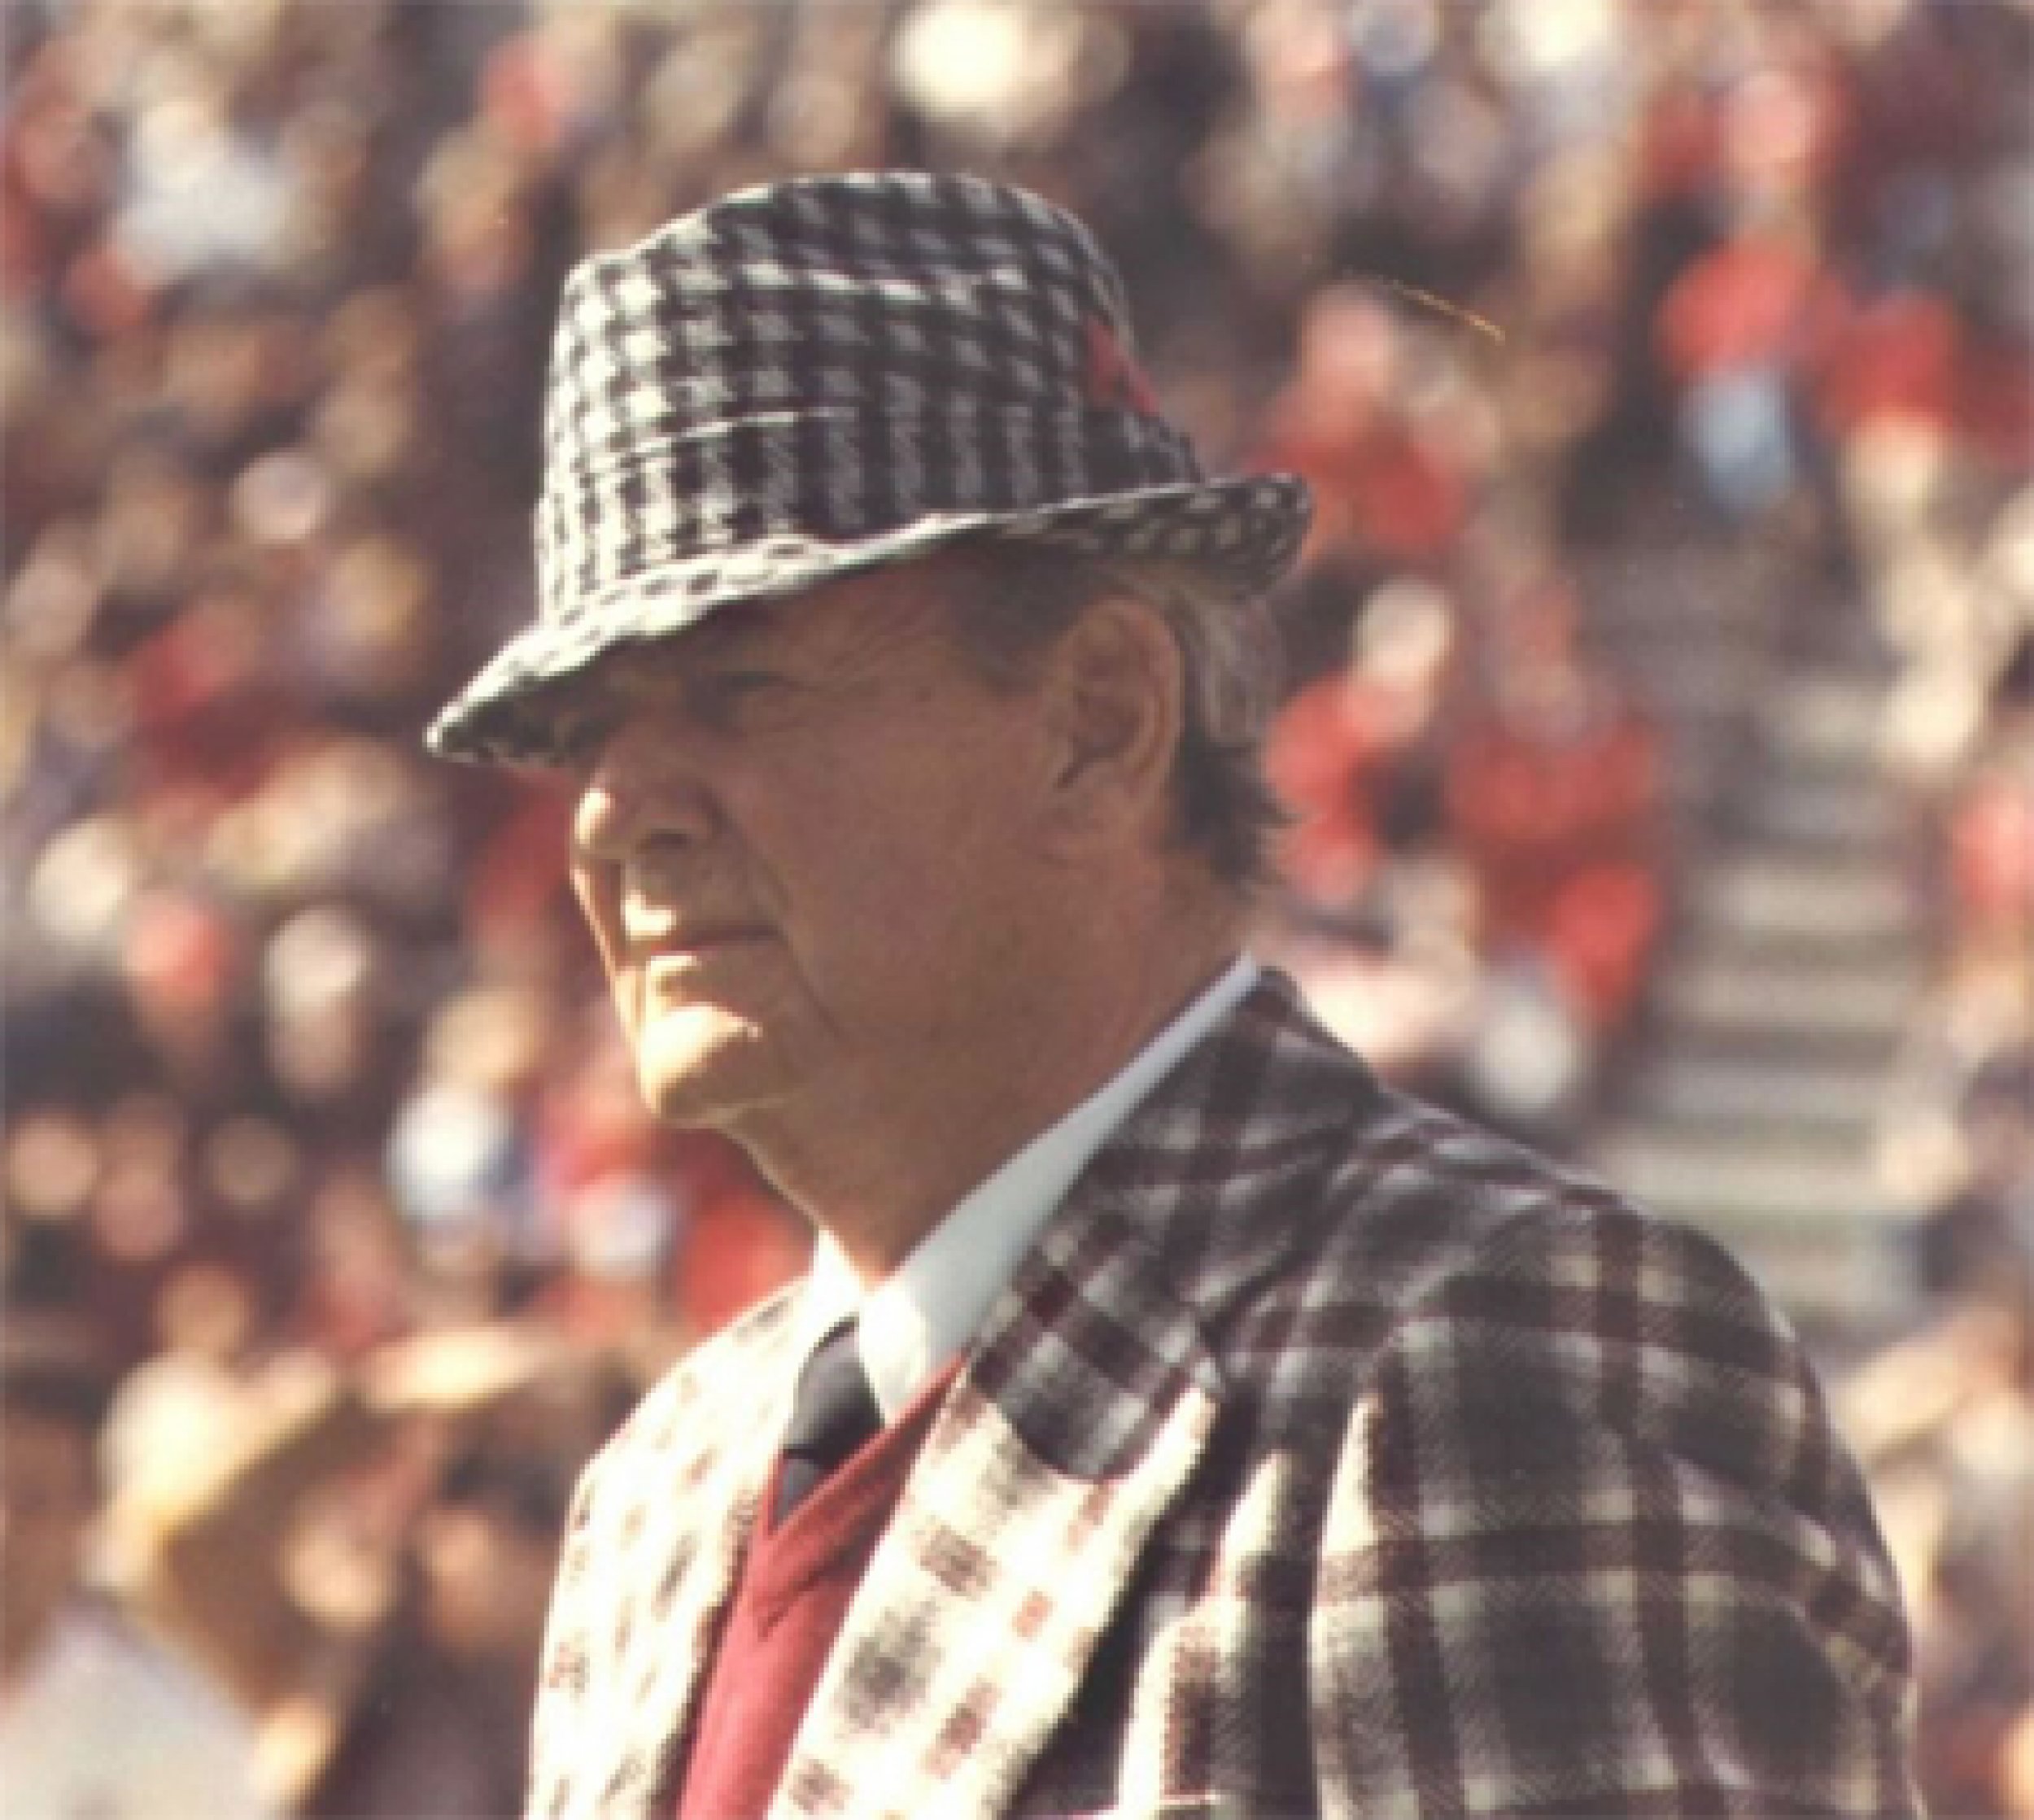 The Bear And The Guv’nor How Alabama Icons Coach Bryant And